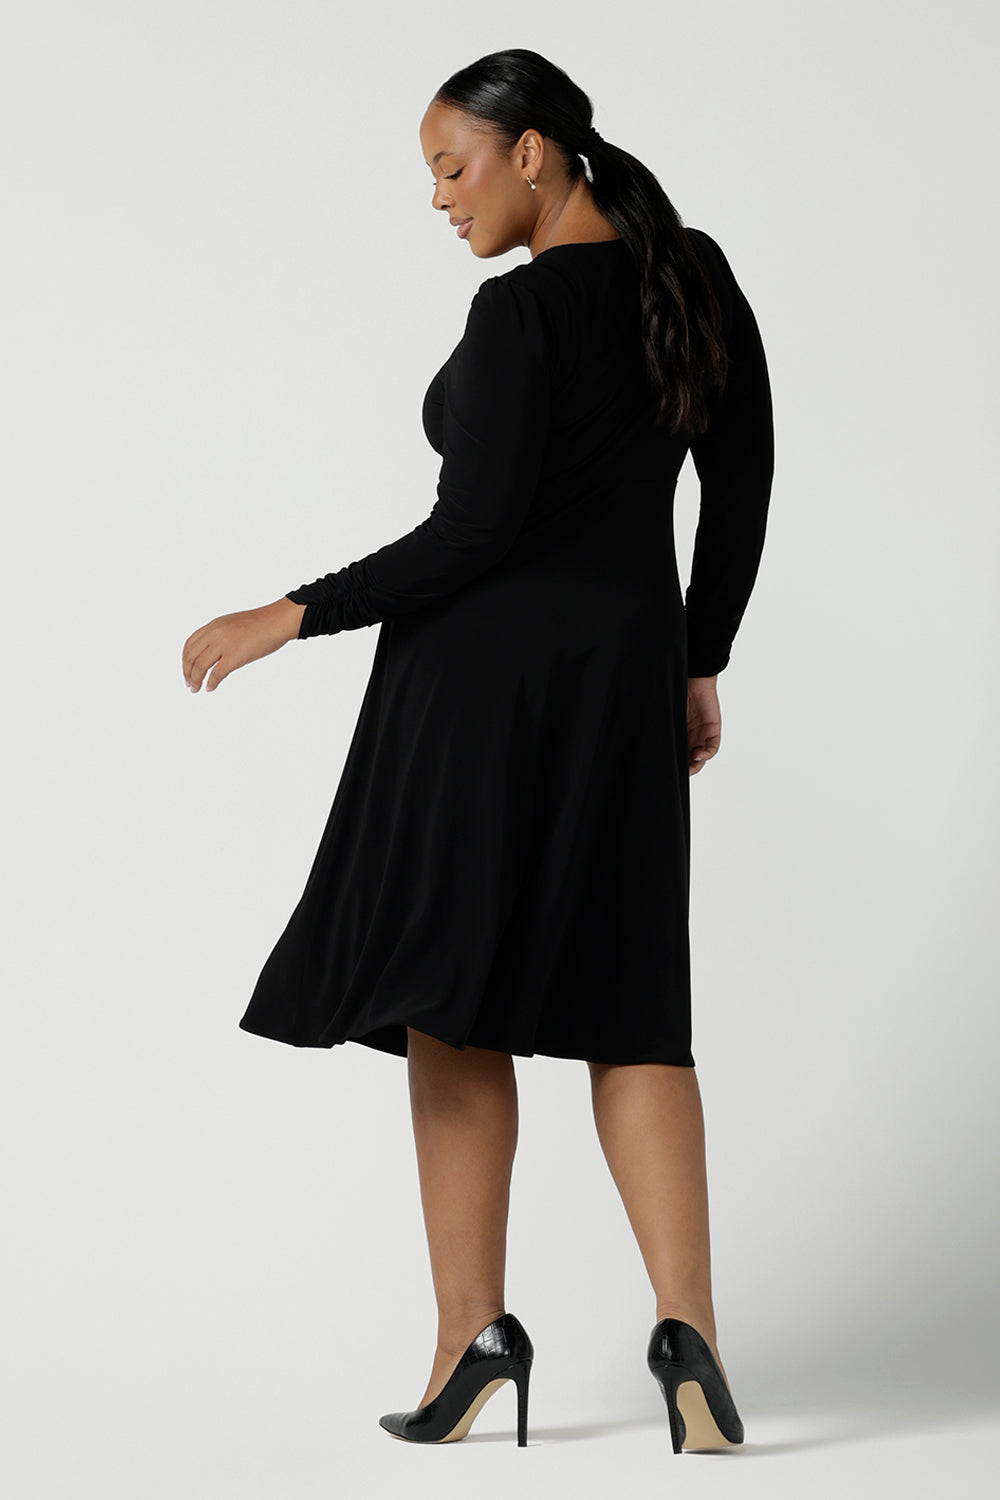 Back view of a size 16 woman wears a Alyssa Dress in jersey. V-neckline style great for work to weekend wear. Corporate dress for women. Travel friendly with an empire line style. Midi dress and styled back with black strappy heels. Made in Australia for women size 8 - 24.